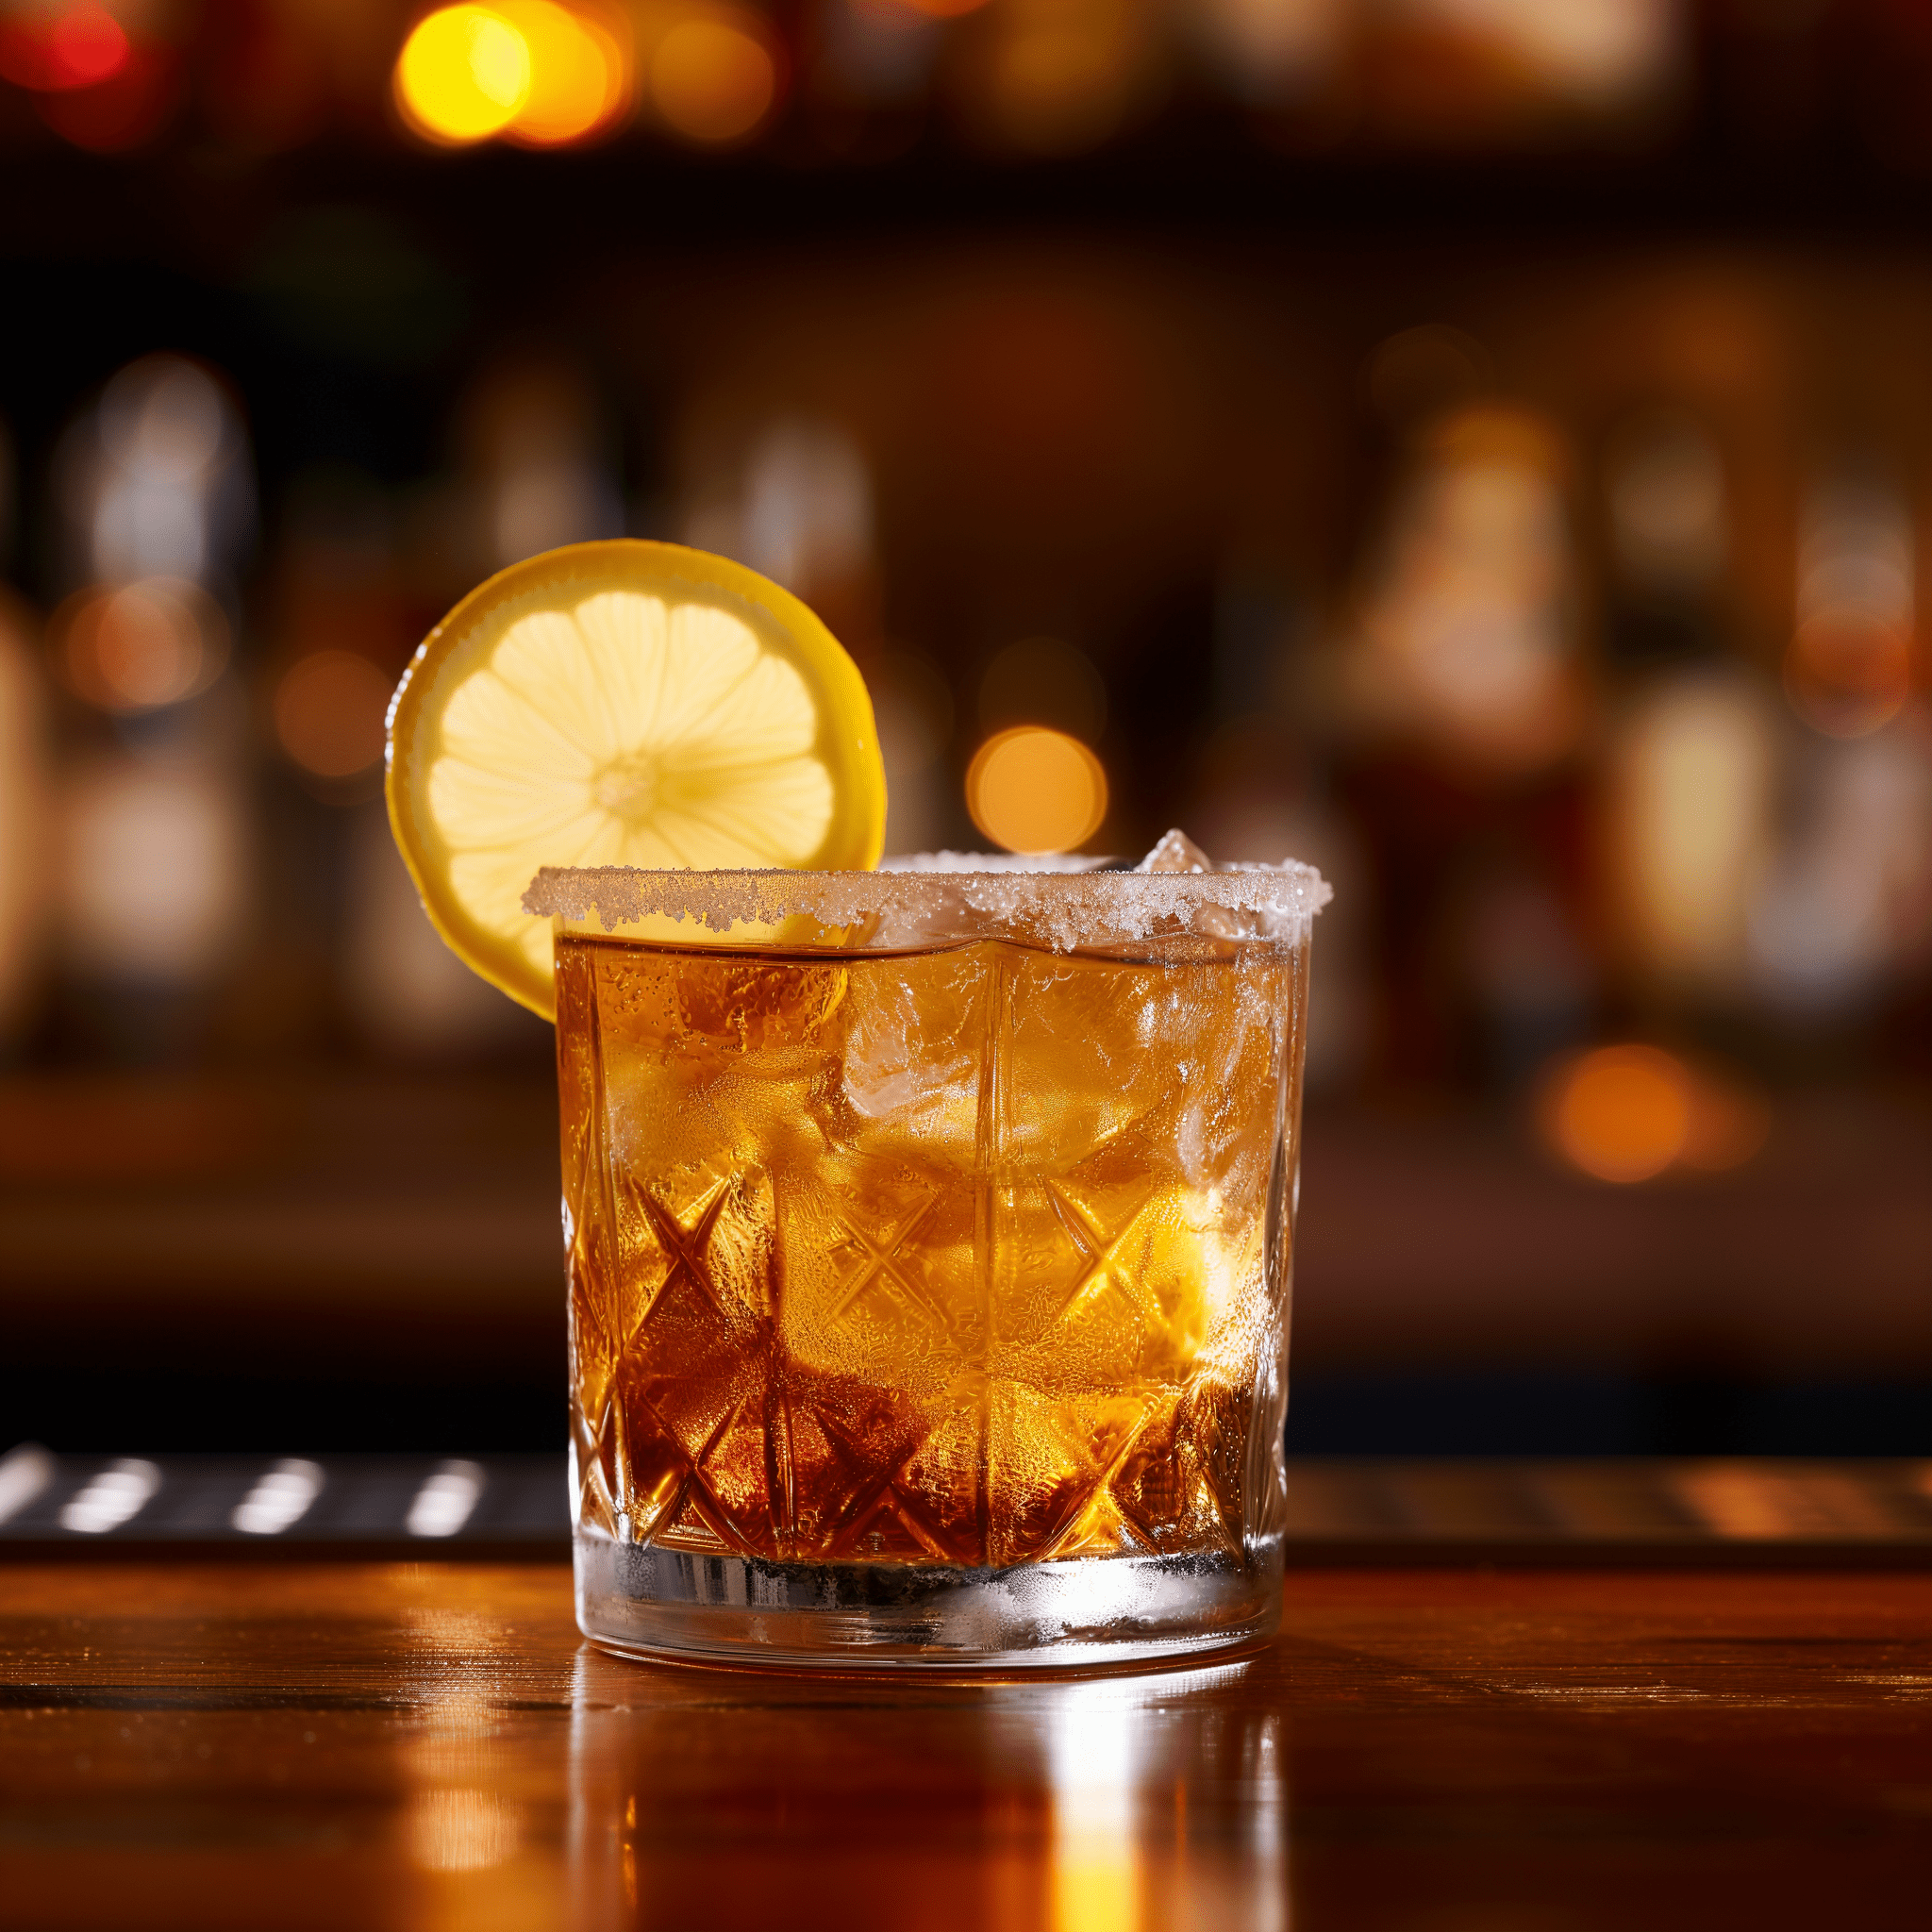 Whiskey Fix Cocktail Recipe - The Whiskey Fix is a harmonious blend of bold and smooth whiskey notes, balanced with the tartness of fresh lemon juice and the sweetness of sugar syrup. It's a robust cocktail with a refreshing edge, perfect for sipping on a warm evening.